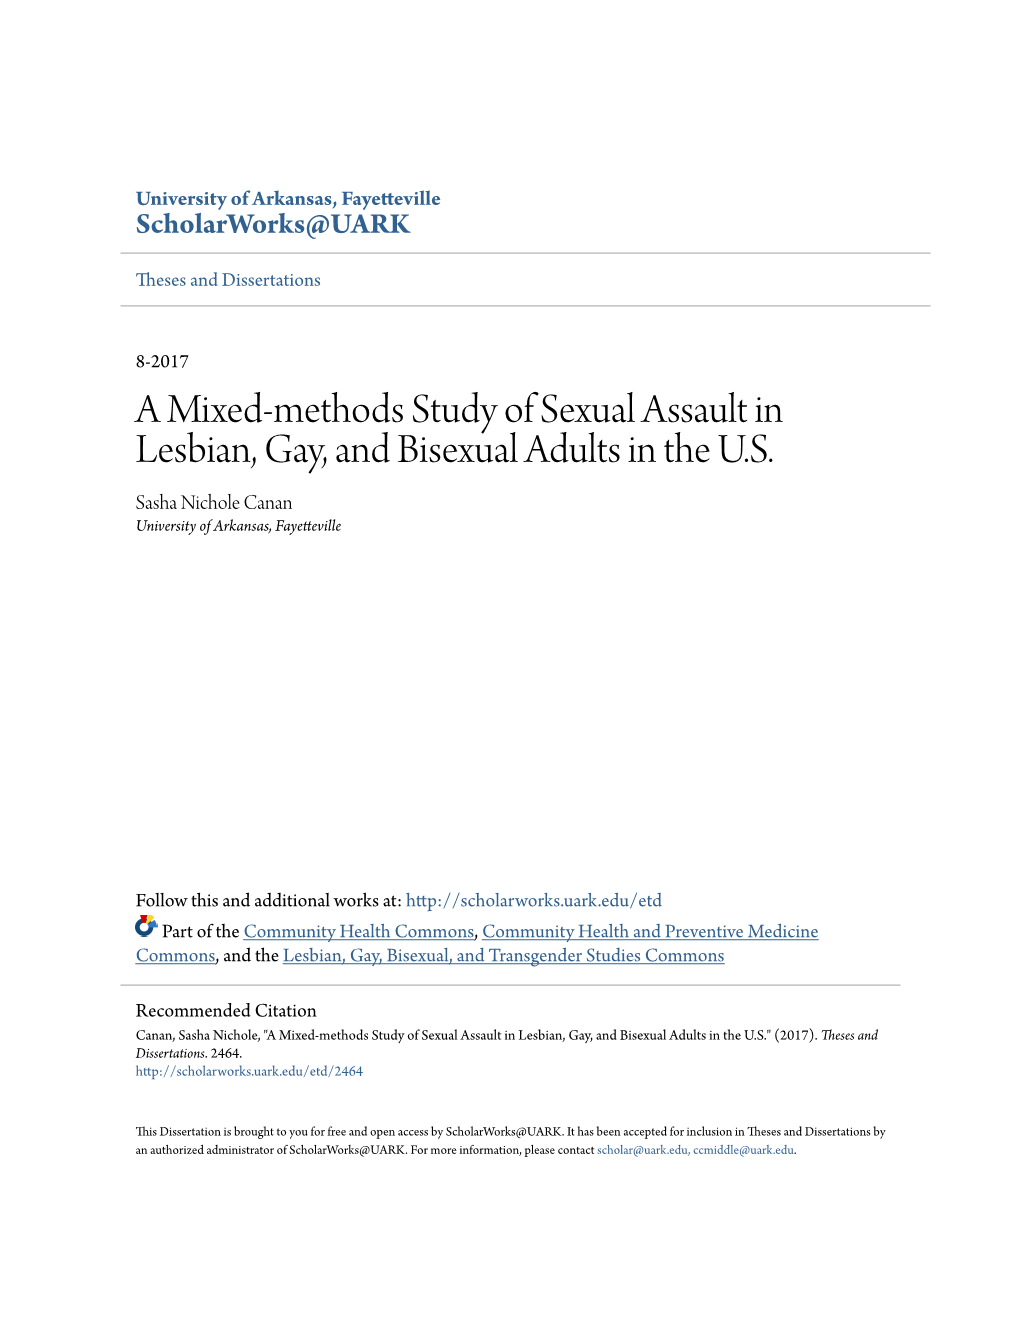 A Mixed-Methods Study of Sexual Assault in Lesbian, Gay, and Bisexual Adults in the U.S